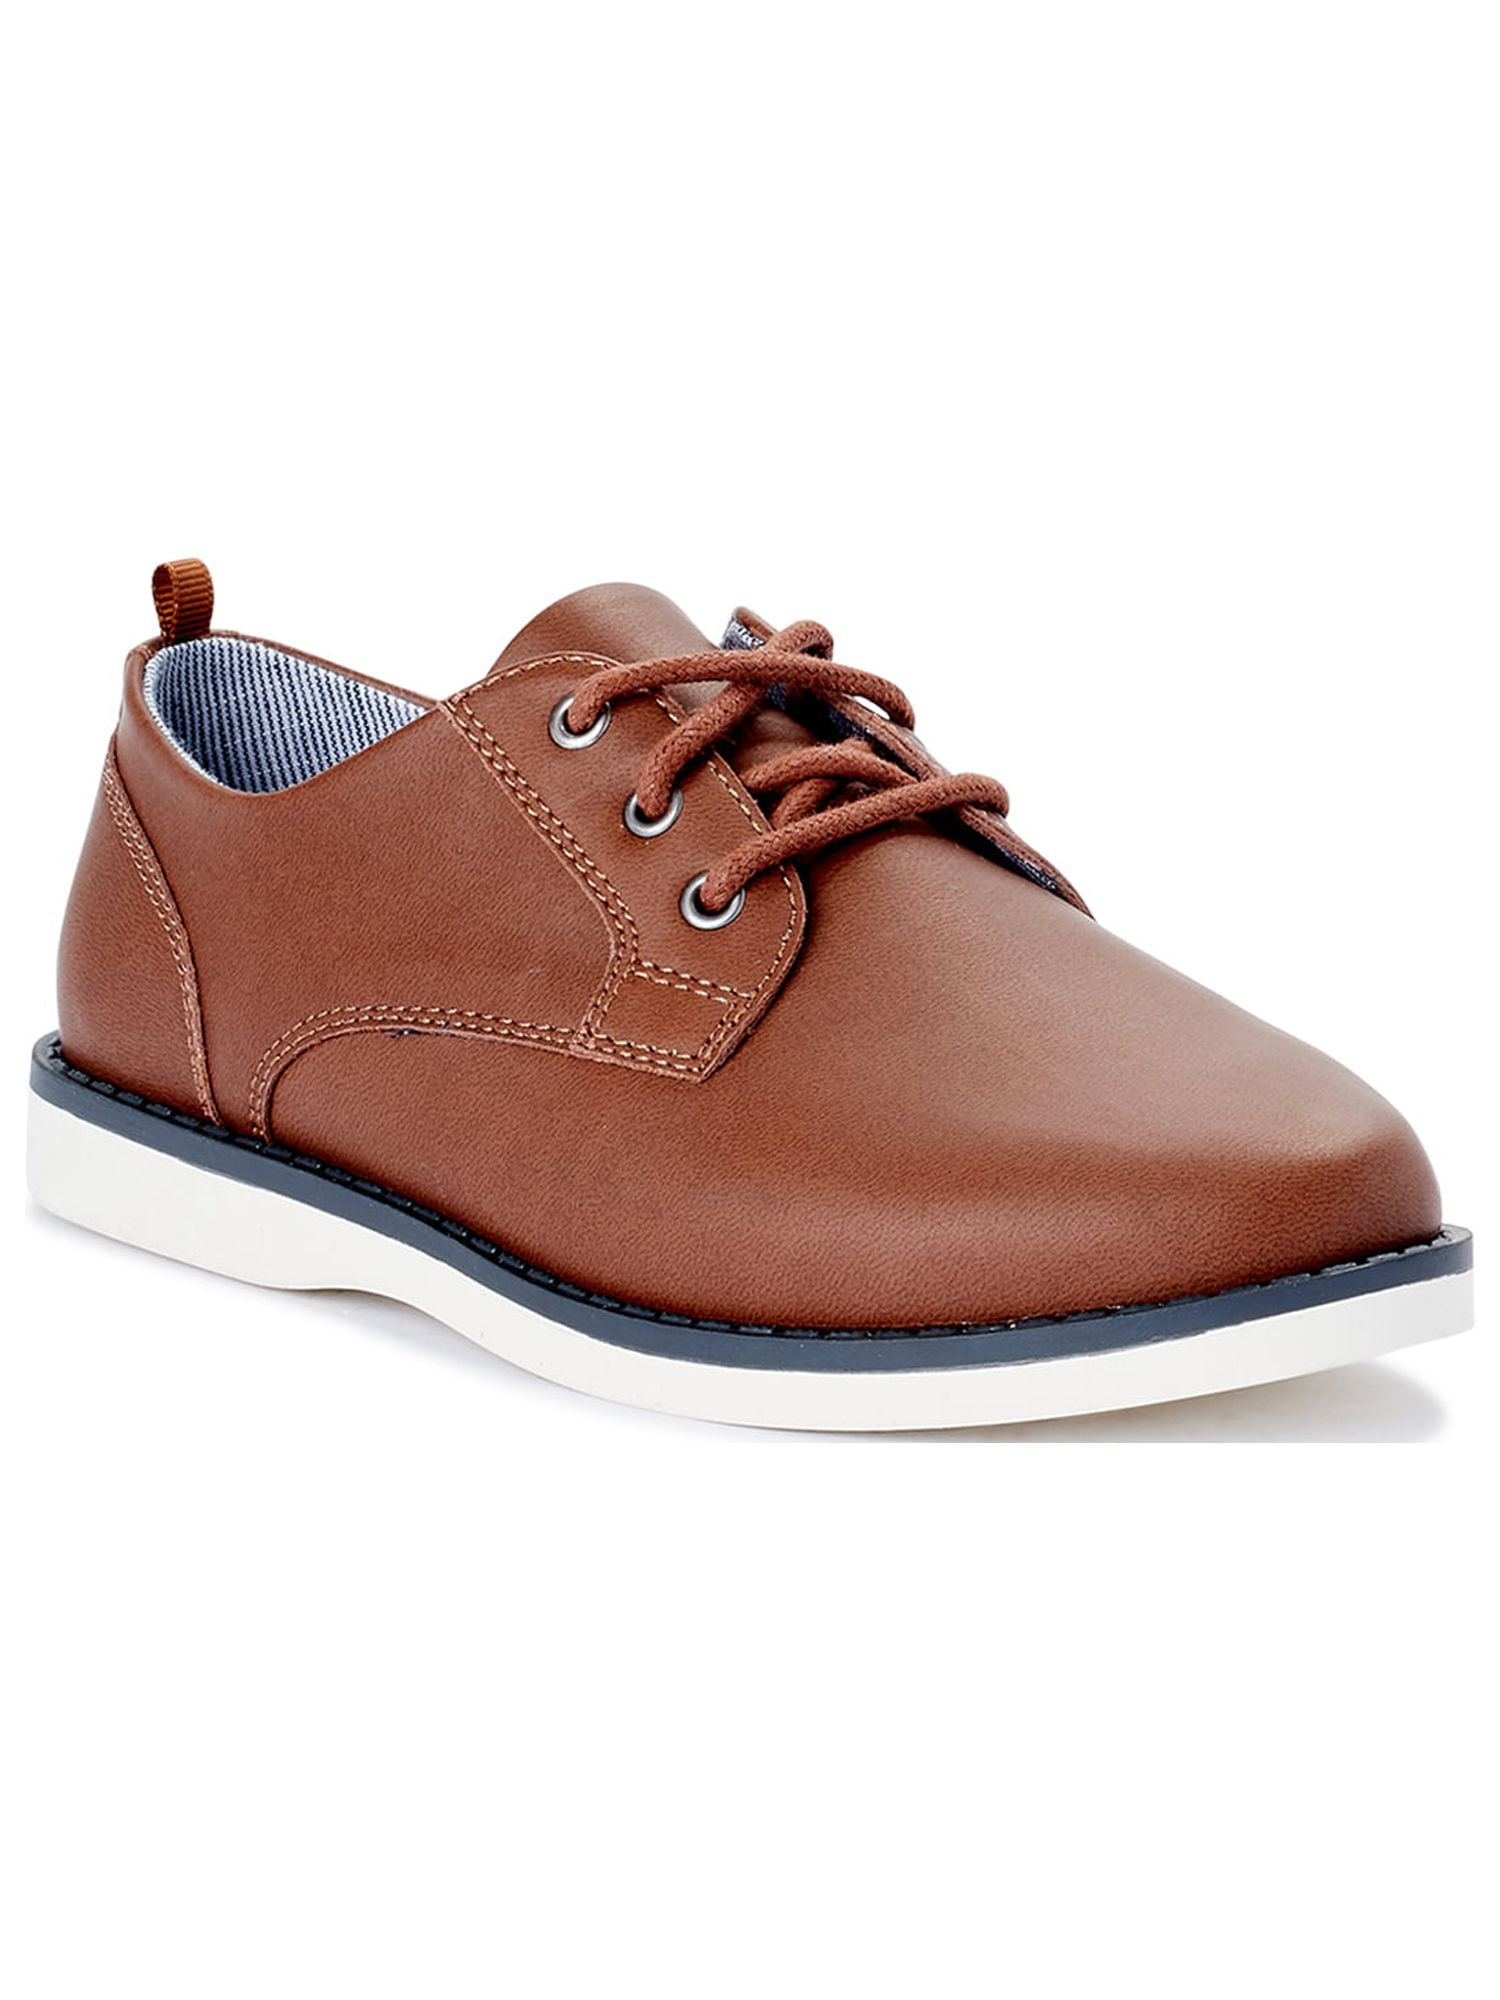 Boys Brown Tan Matt Formal Shoes | Boys Wedding Shoes | Lace Up Shoes | First Walkers